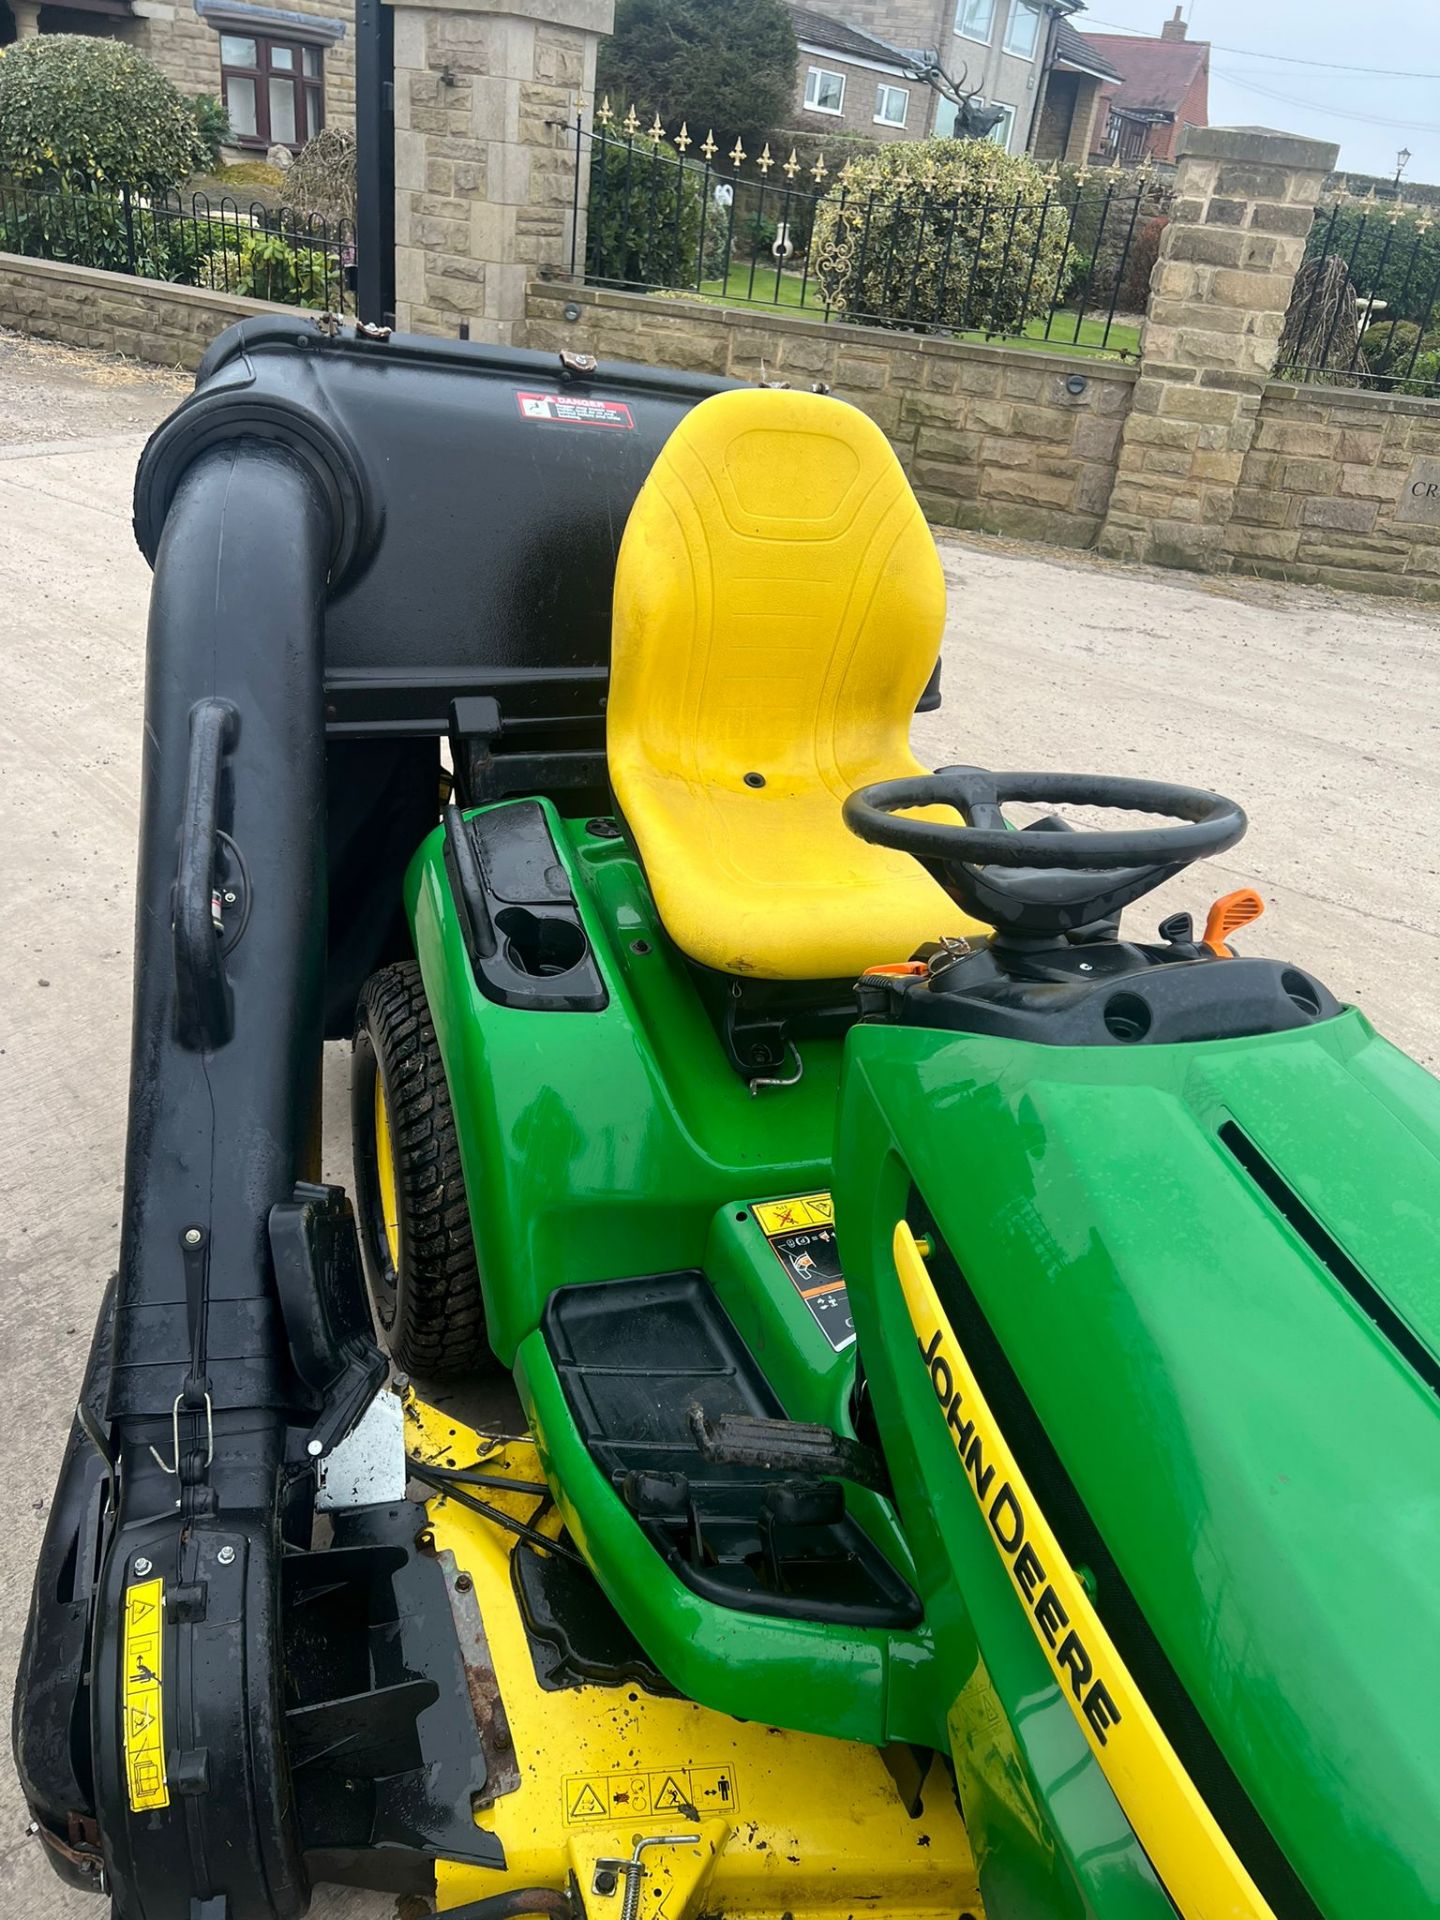 JOHN DEERE X540 RIDE ON LAWN MOWER, HYDRAULIC UP AND DOWN DECK, YEAR 2012 *PLUS VAT* - Image 6 of 9